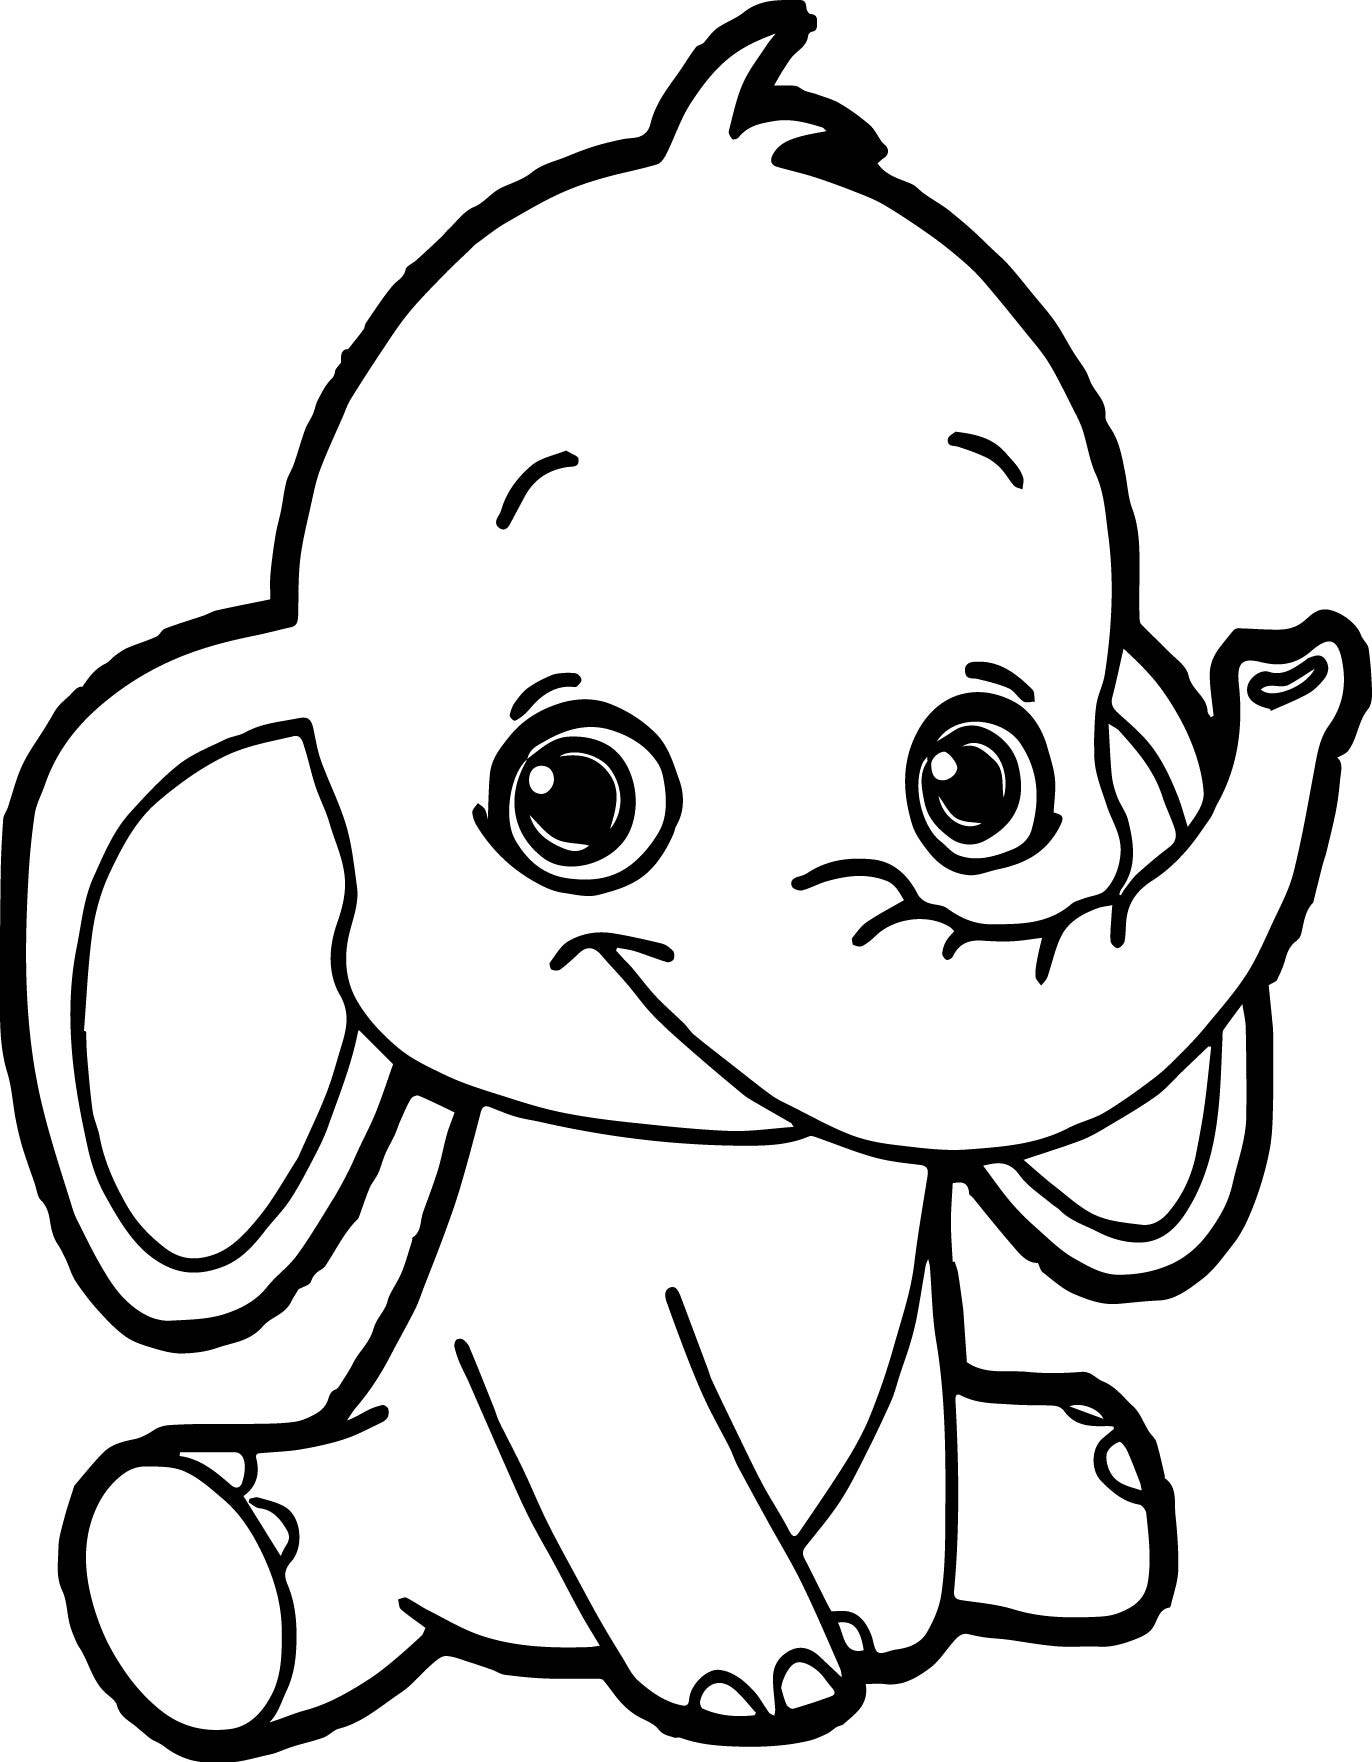 Cute Baby Elephant Coloring Pages
 Baby Elephant Coloring Page